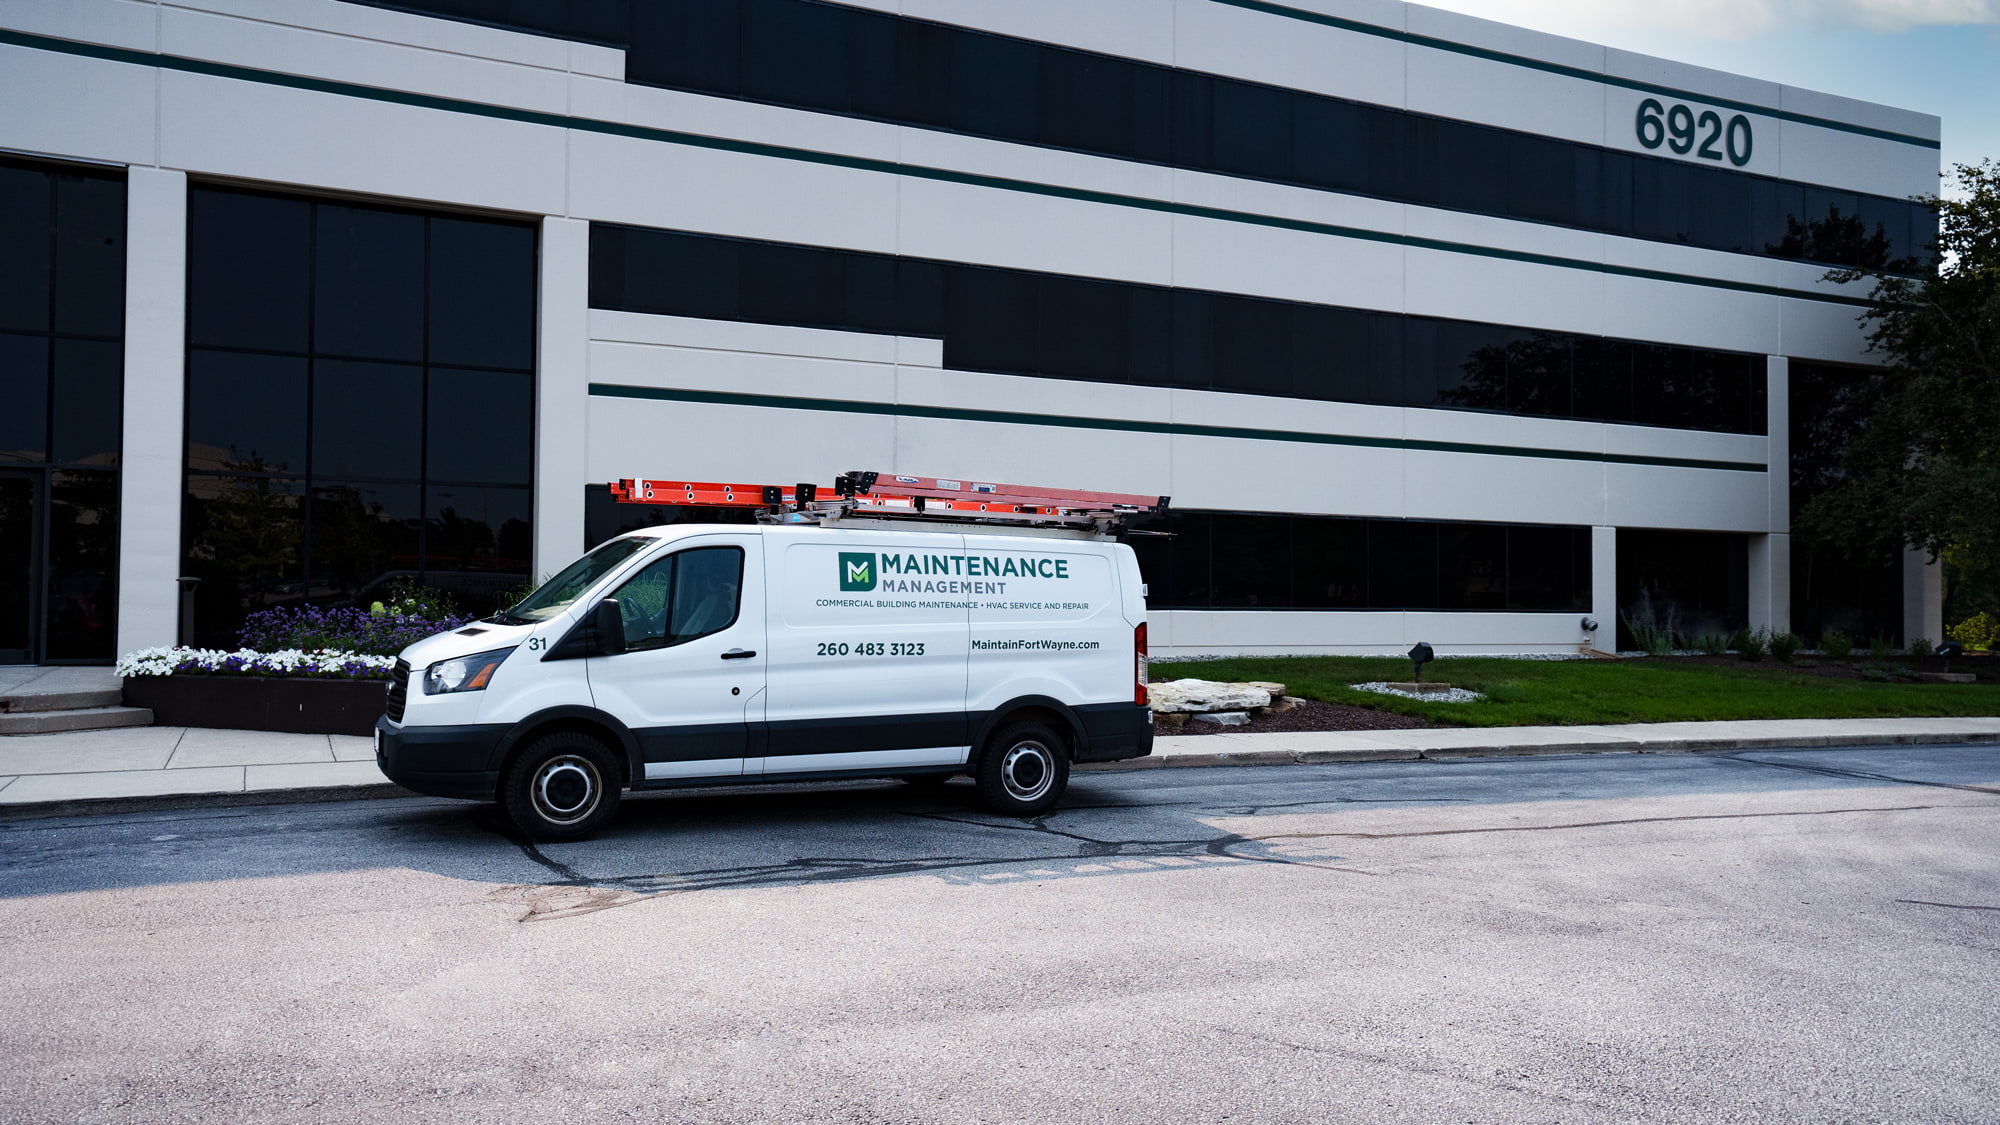 Maintenance Management outsourcing maintenance and HVAC service van in front of multi-tenant office building.